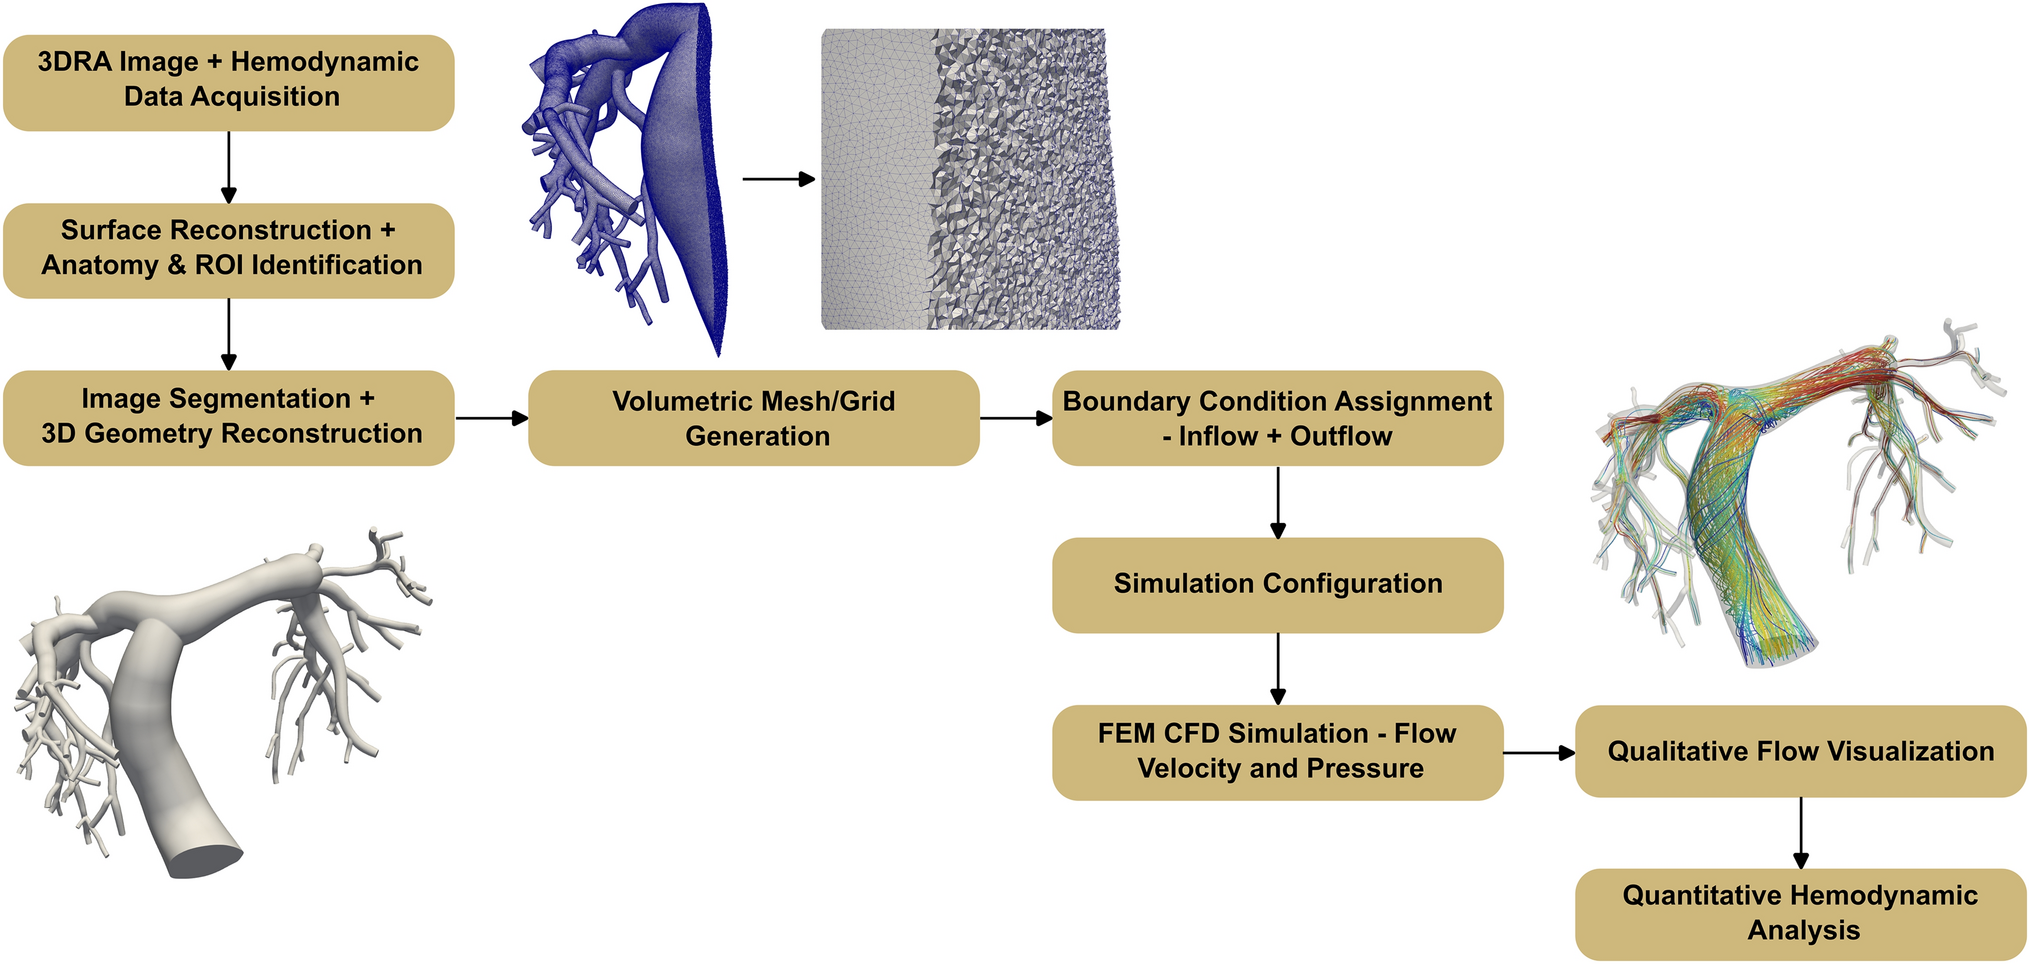 Computational Fluid Dynamic Assessment of Patients with Congenital Heart Disease from 3D Rotational Angiography